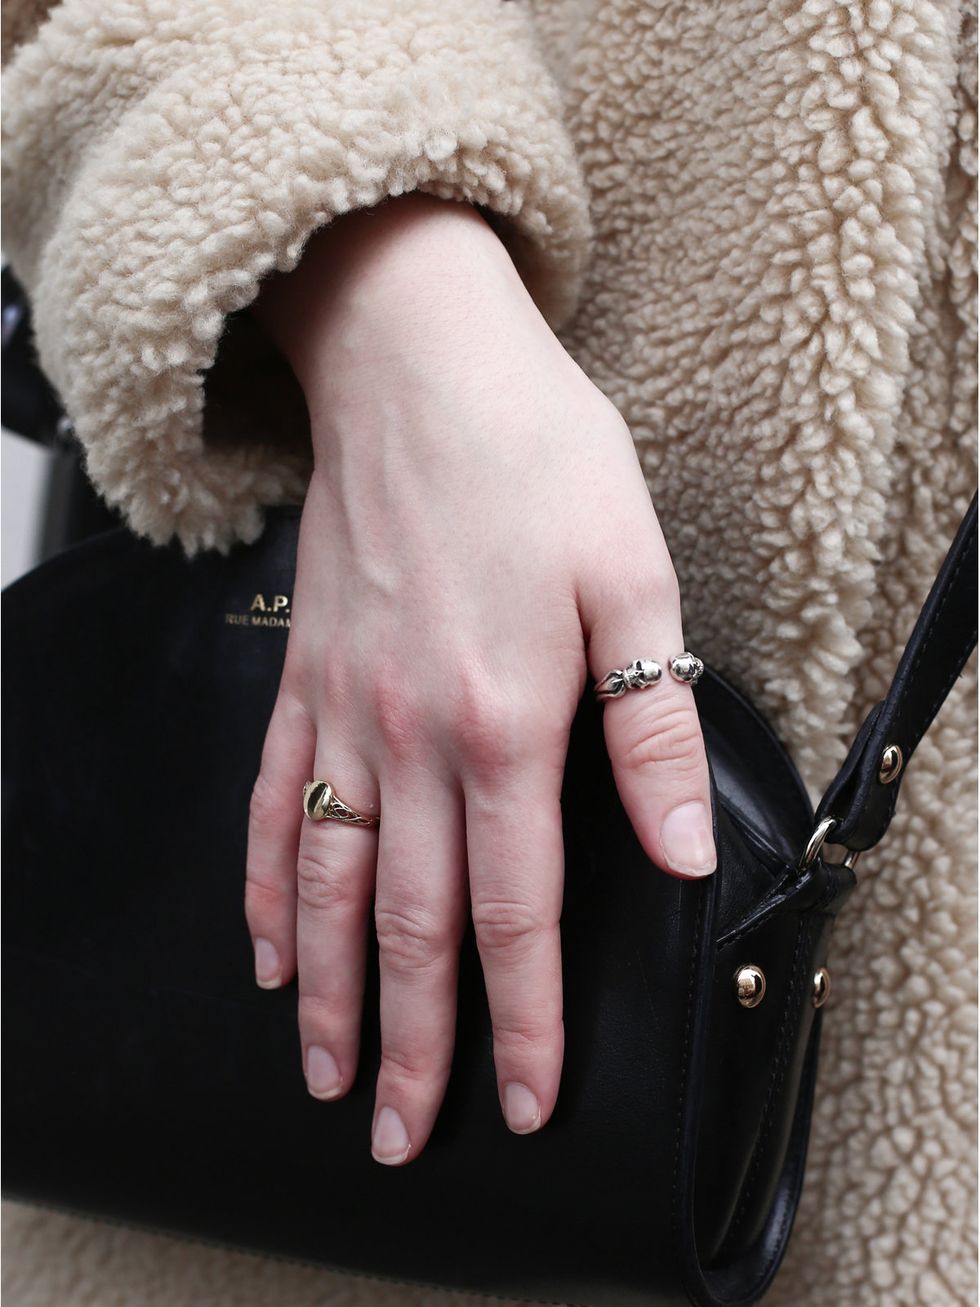 Finger, Brown, Textile, Hand, Style, Fashion accessory, Wrist, Fashion, Nail, Leather, 